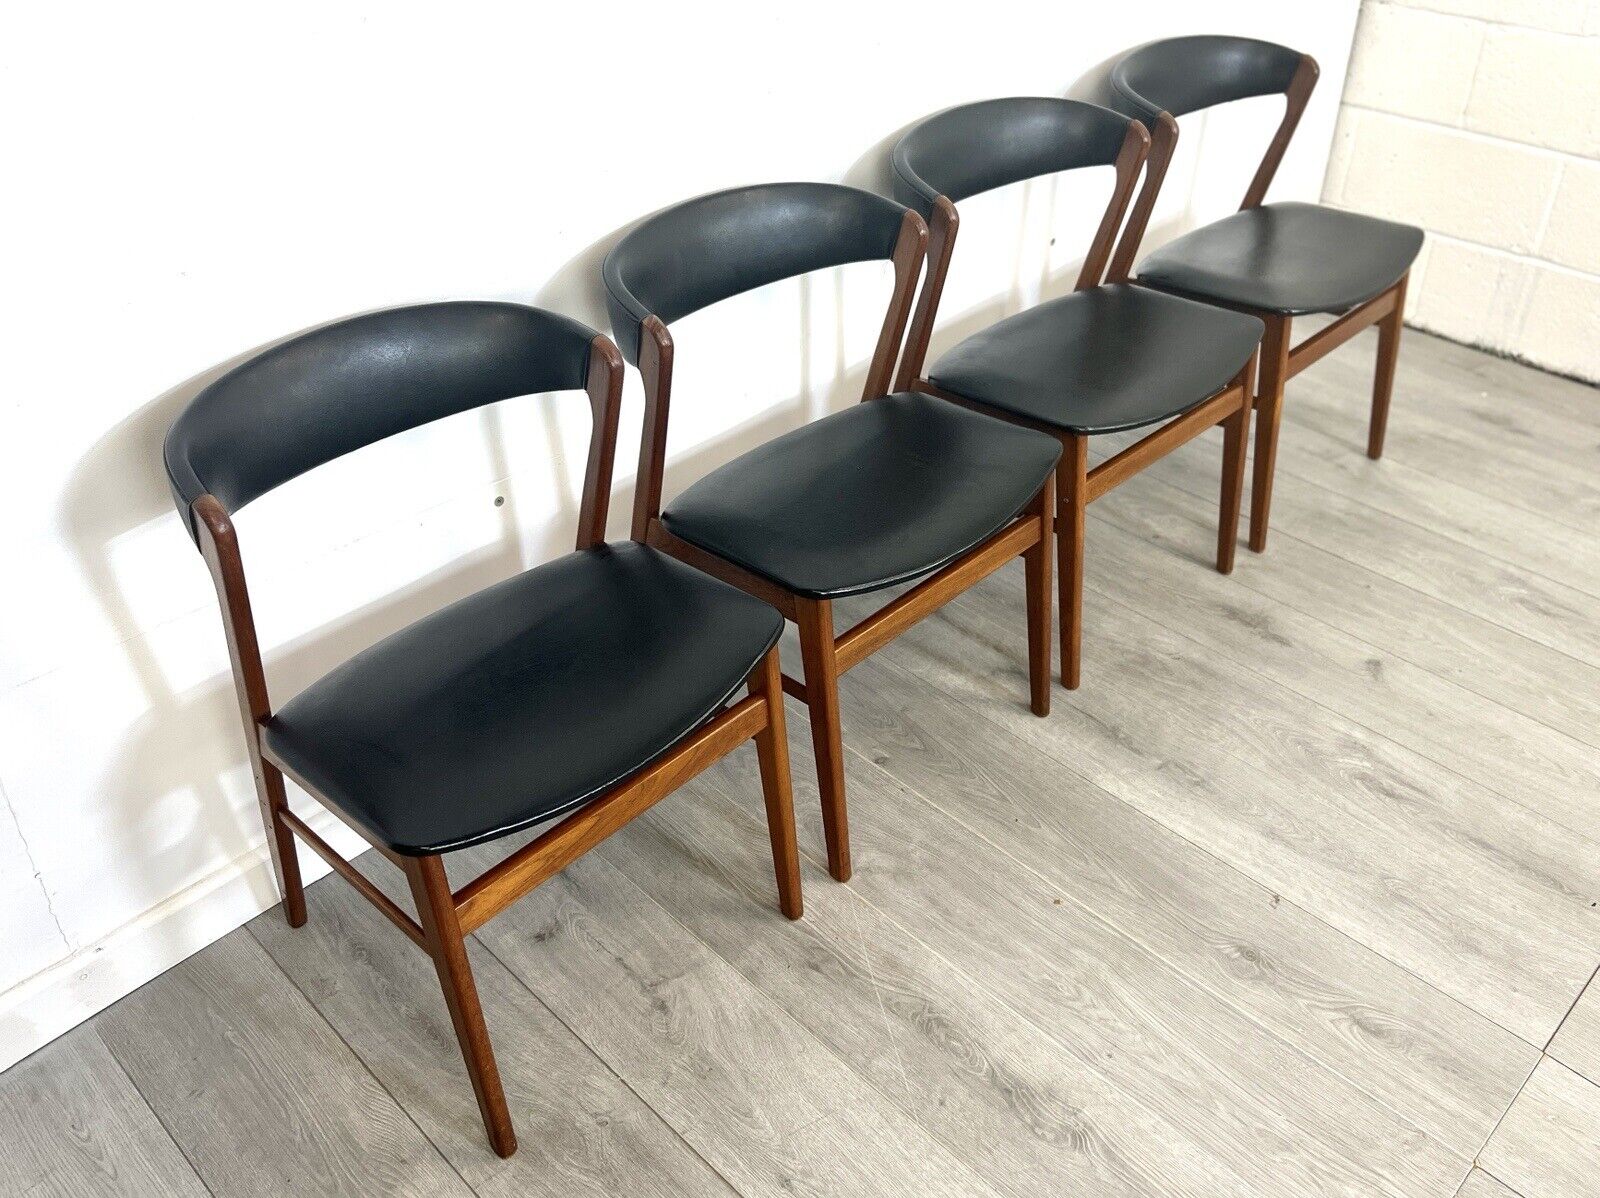 Sax, Set of 4 Mid Century Teak and Leatherette Dining Chairs